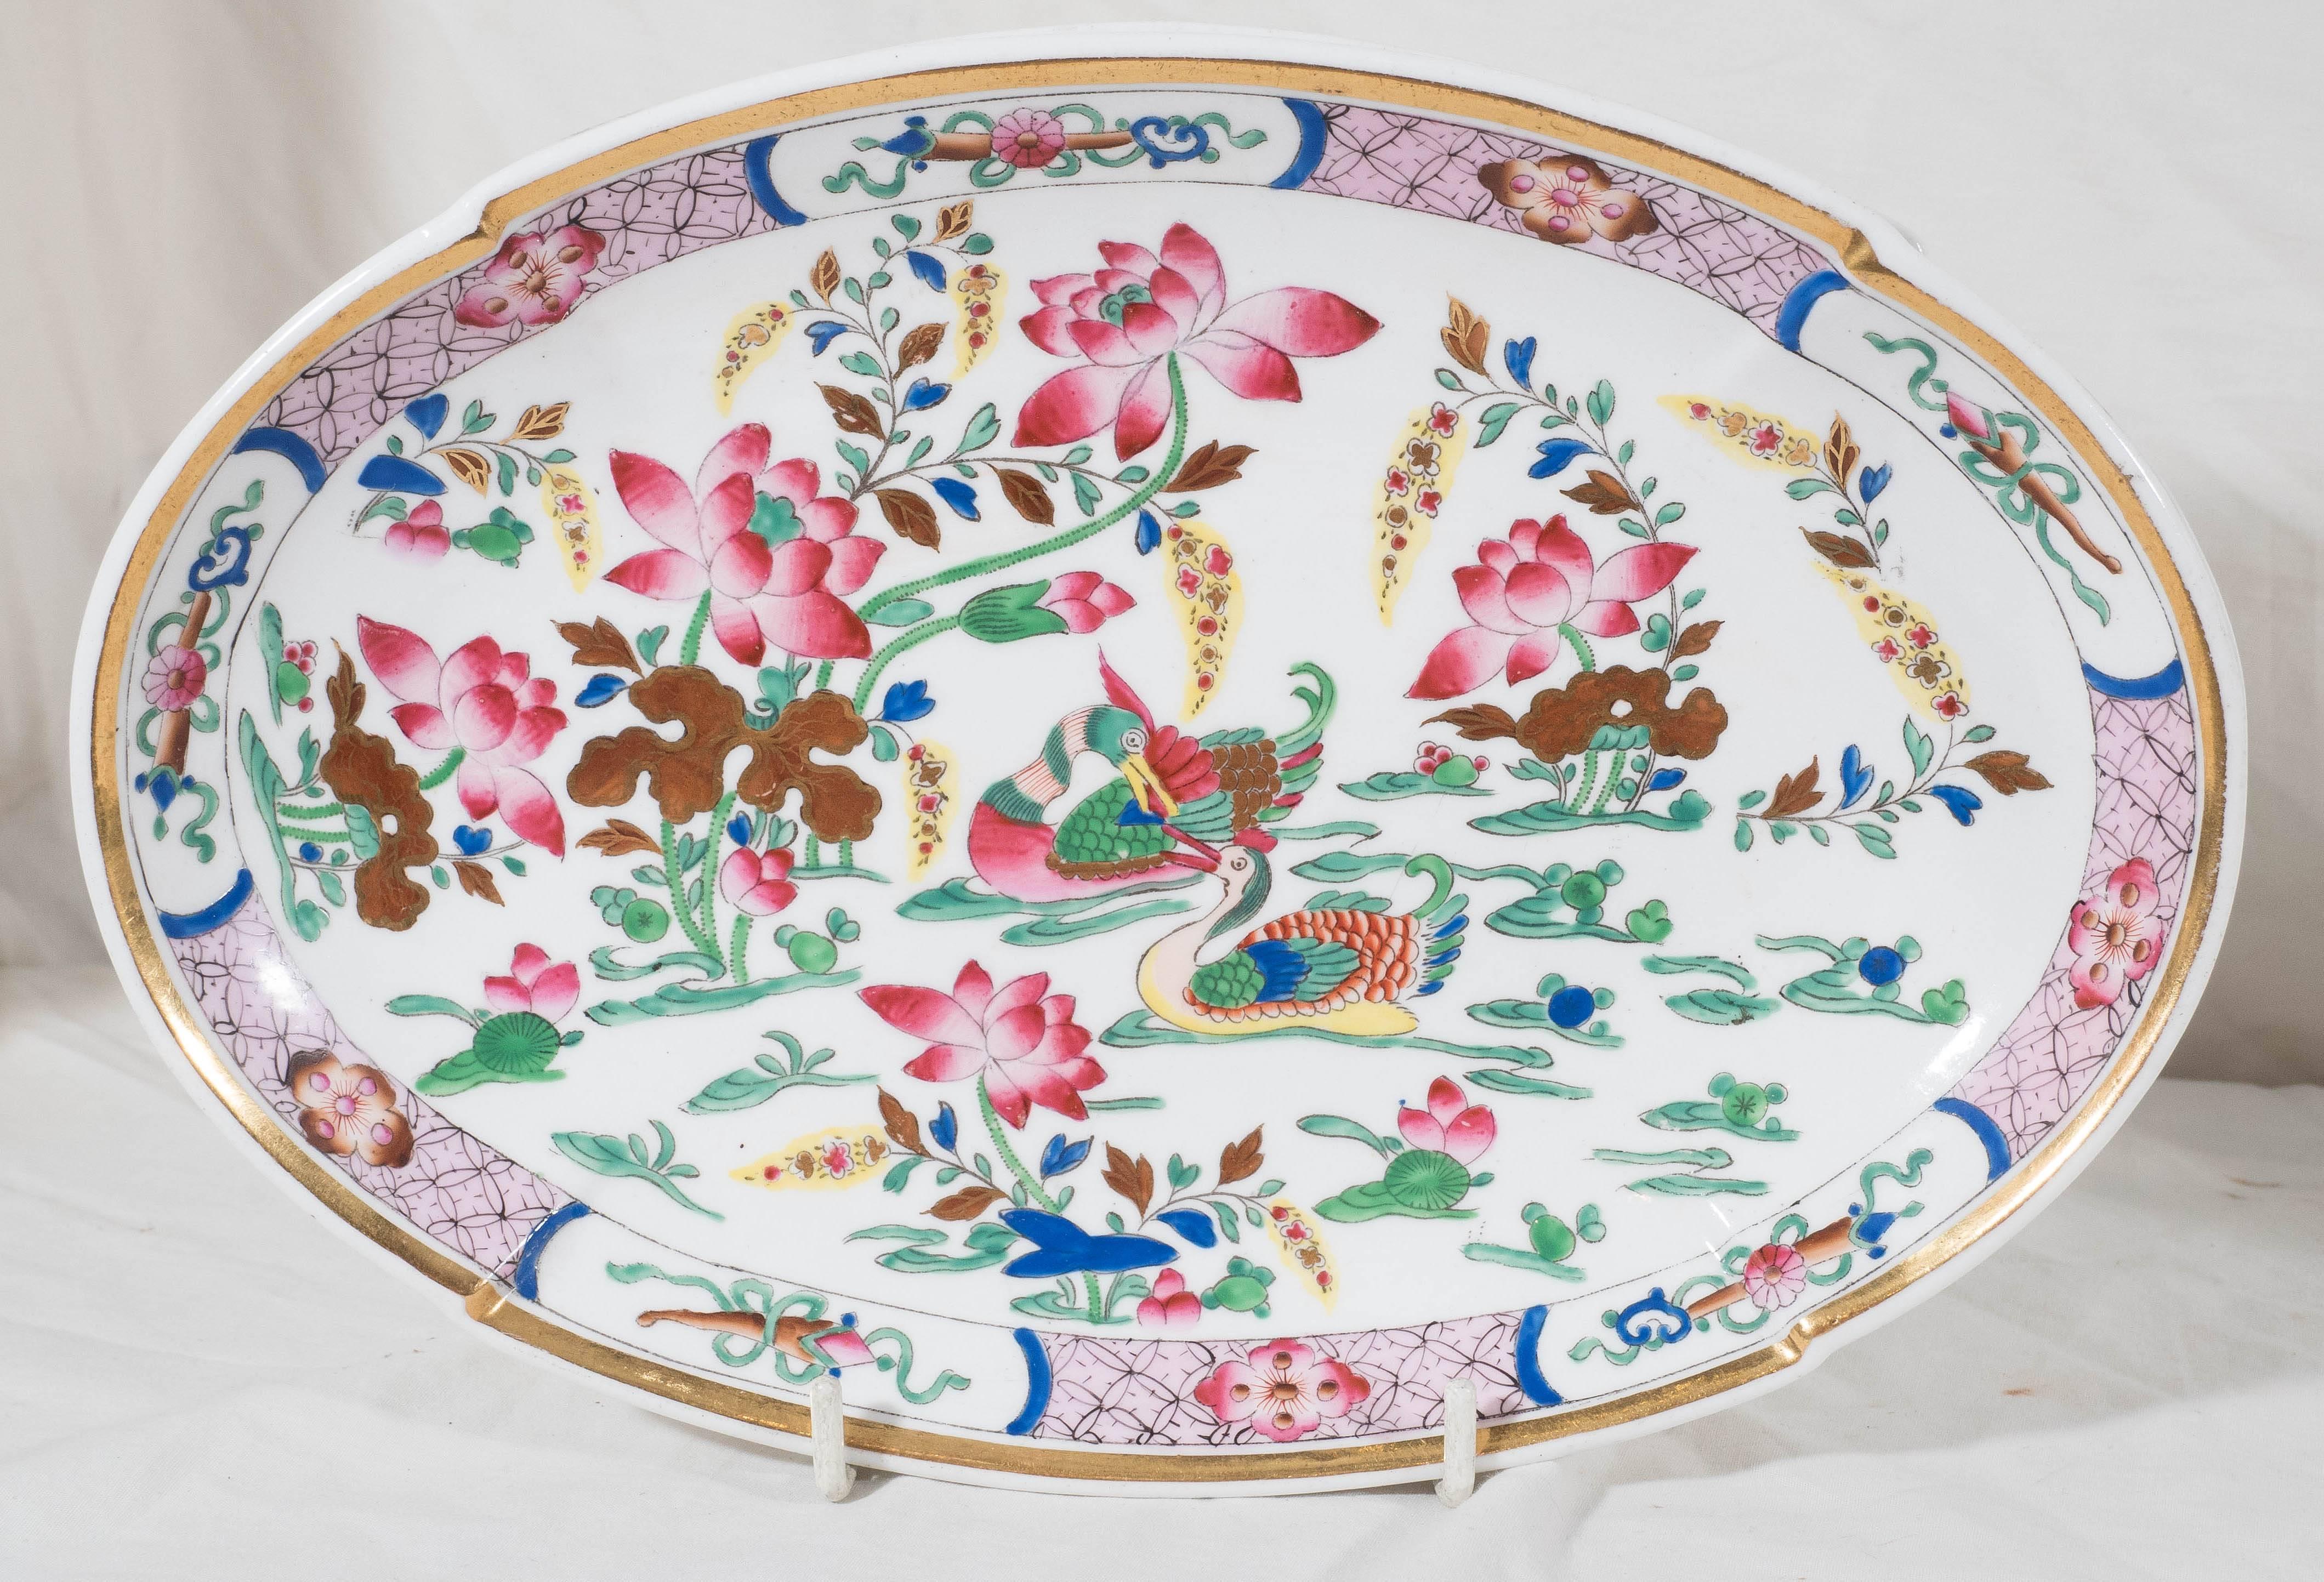 Enameled 16 Pink Antique Porcelain Dishes in the Mandarin Ducks Pattern Made circa 1820